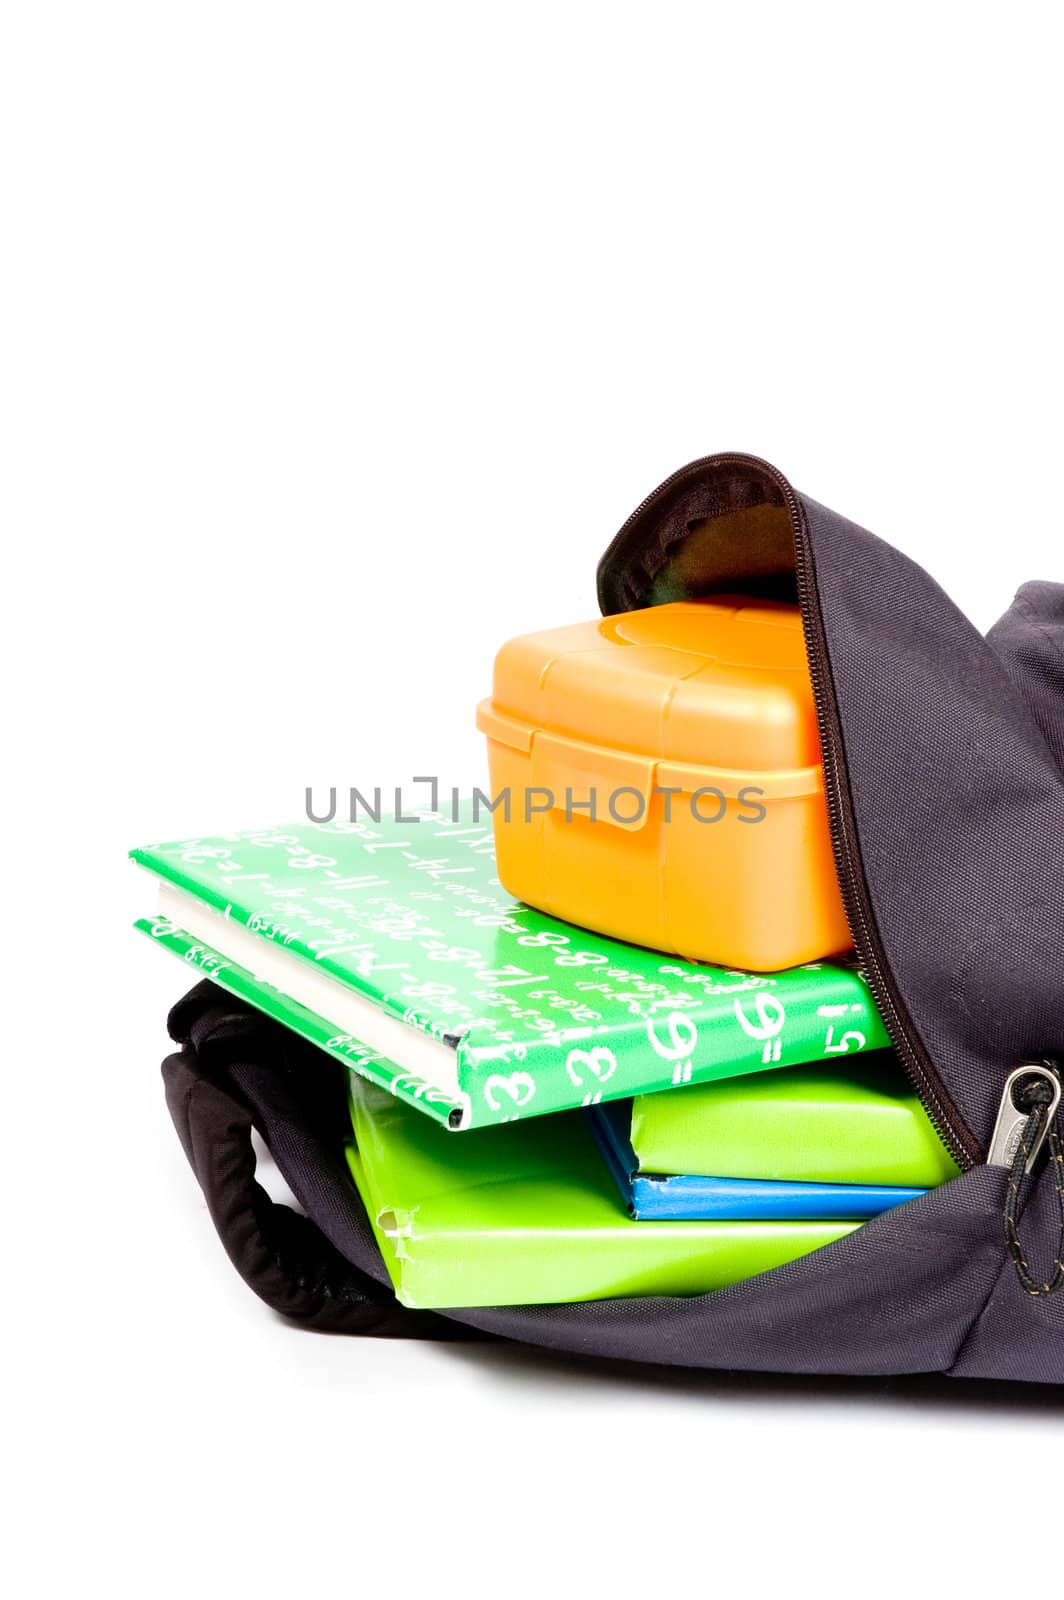 open schoolbag with books and lunchbox on white